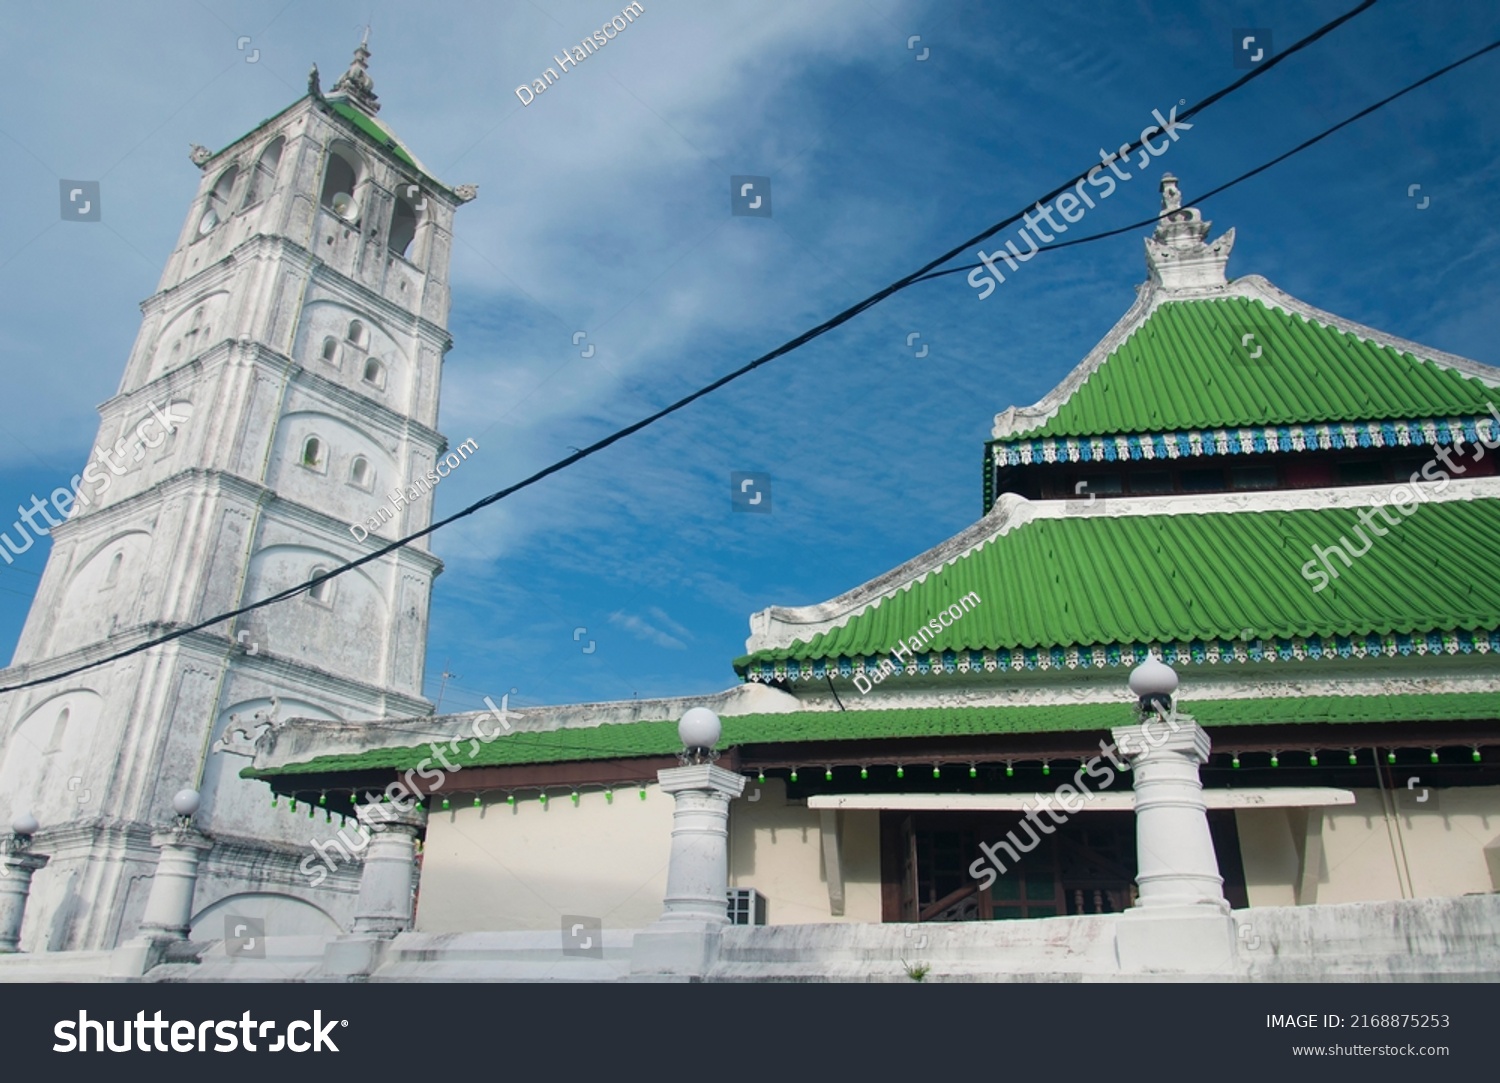 the historic weathered tower at the Kampung Kling mosque built in 1748 in the city of Malacca Malaysia on a blue sky day. #2168875253